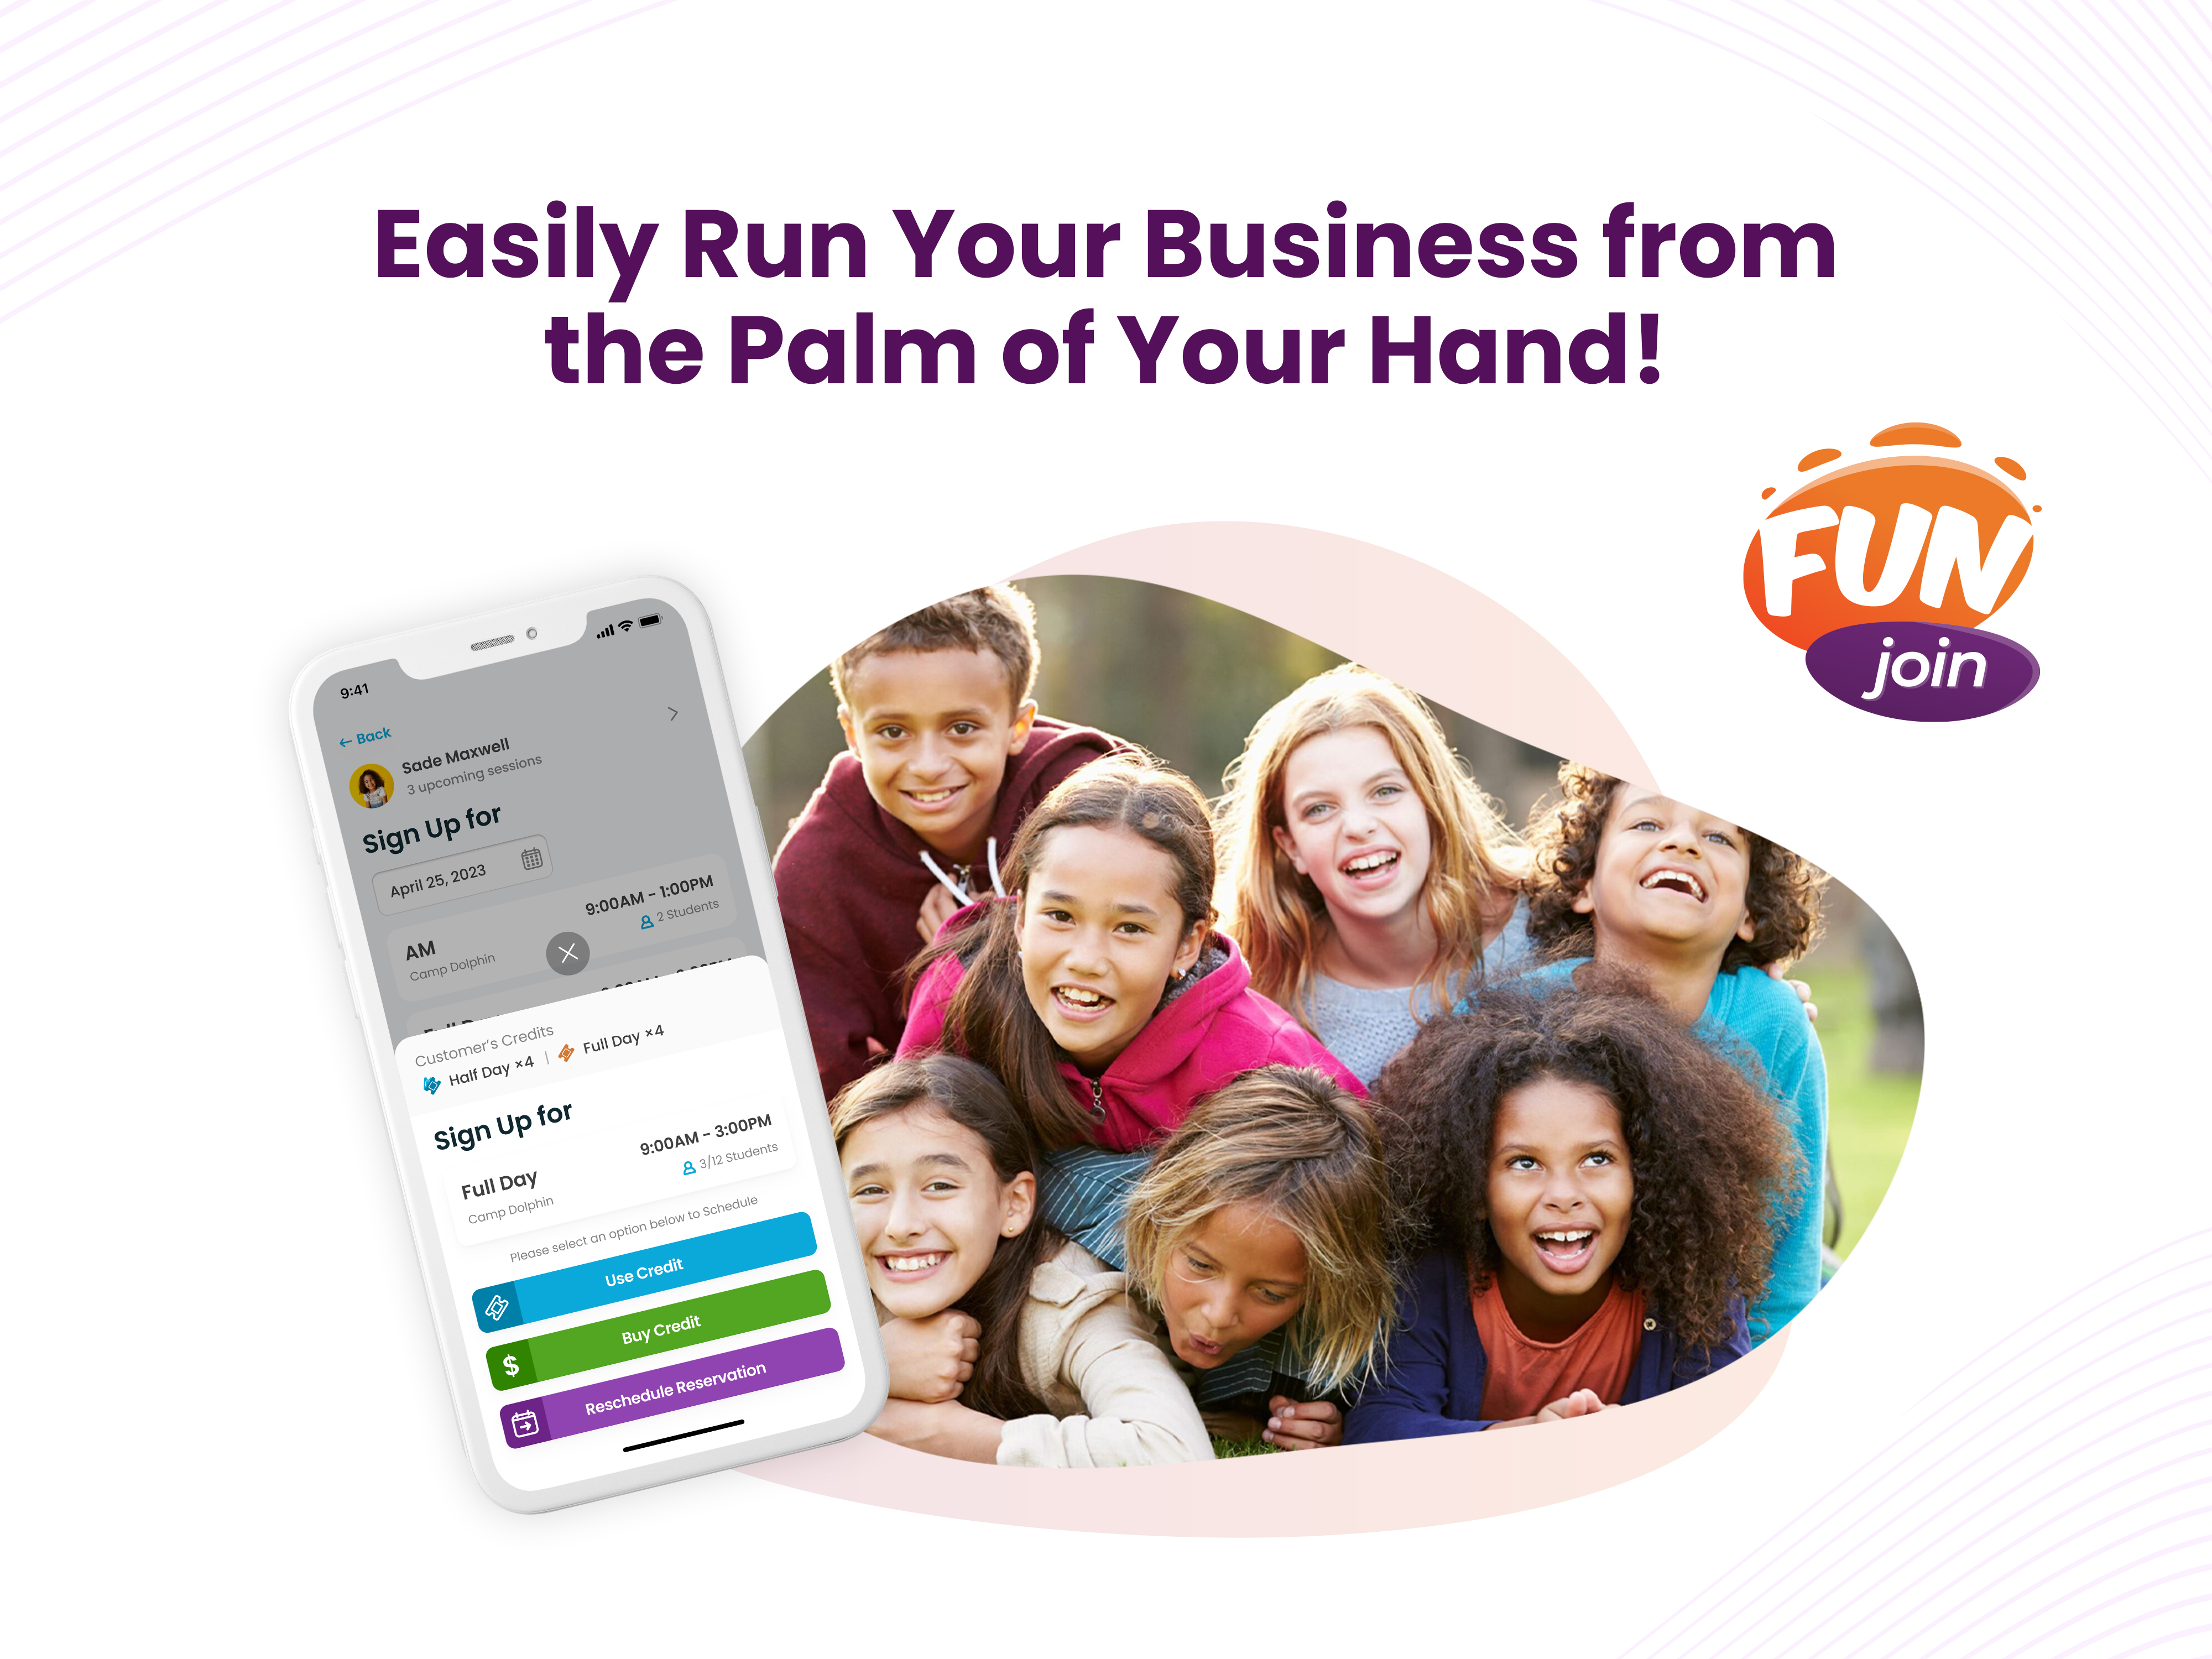 FunJoin transforms your phone into a powerful business management tool, letting you run your operations from the palm of your hand. Features include real-time tracking, efficient communication, digital document handling, and much more